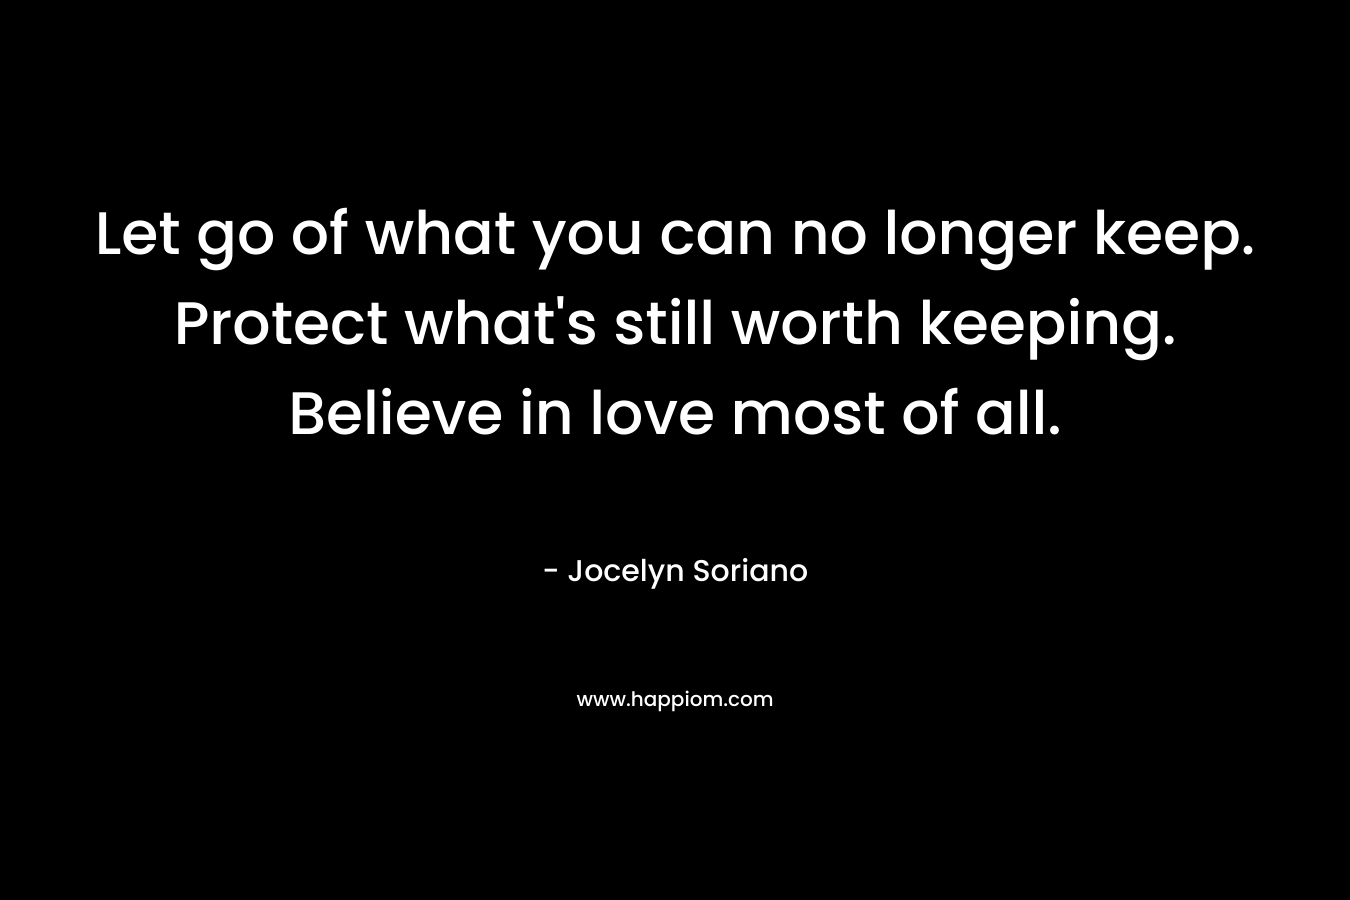 Let go of what you can no longer keep. Protect what's still worth keeping. Believe in love most of all.